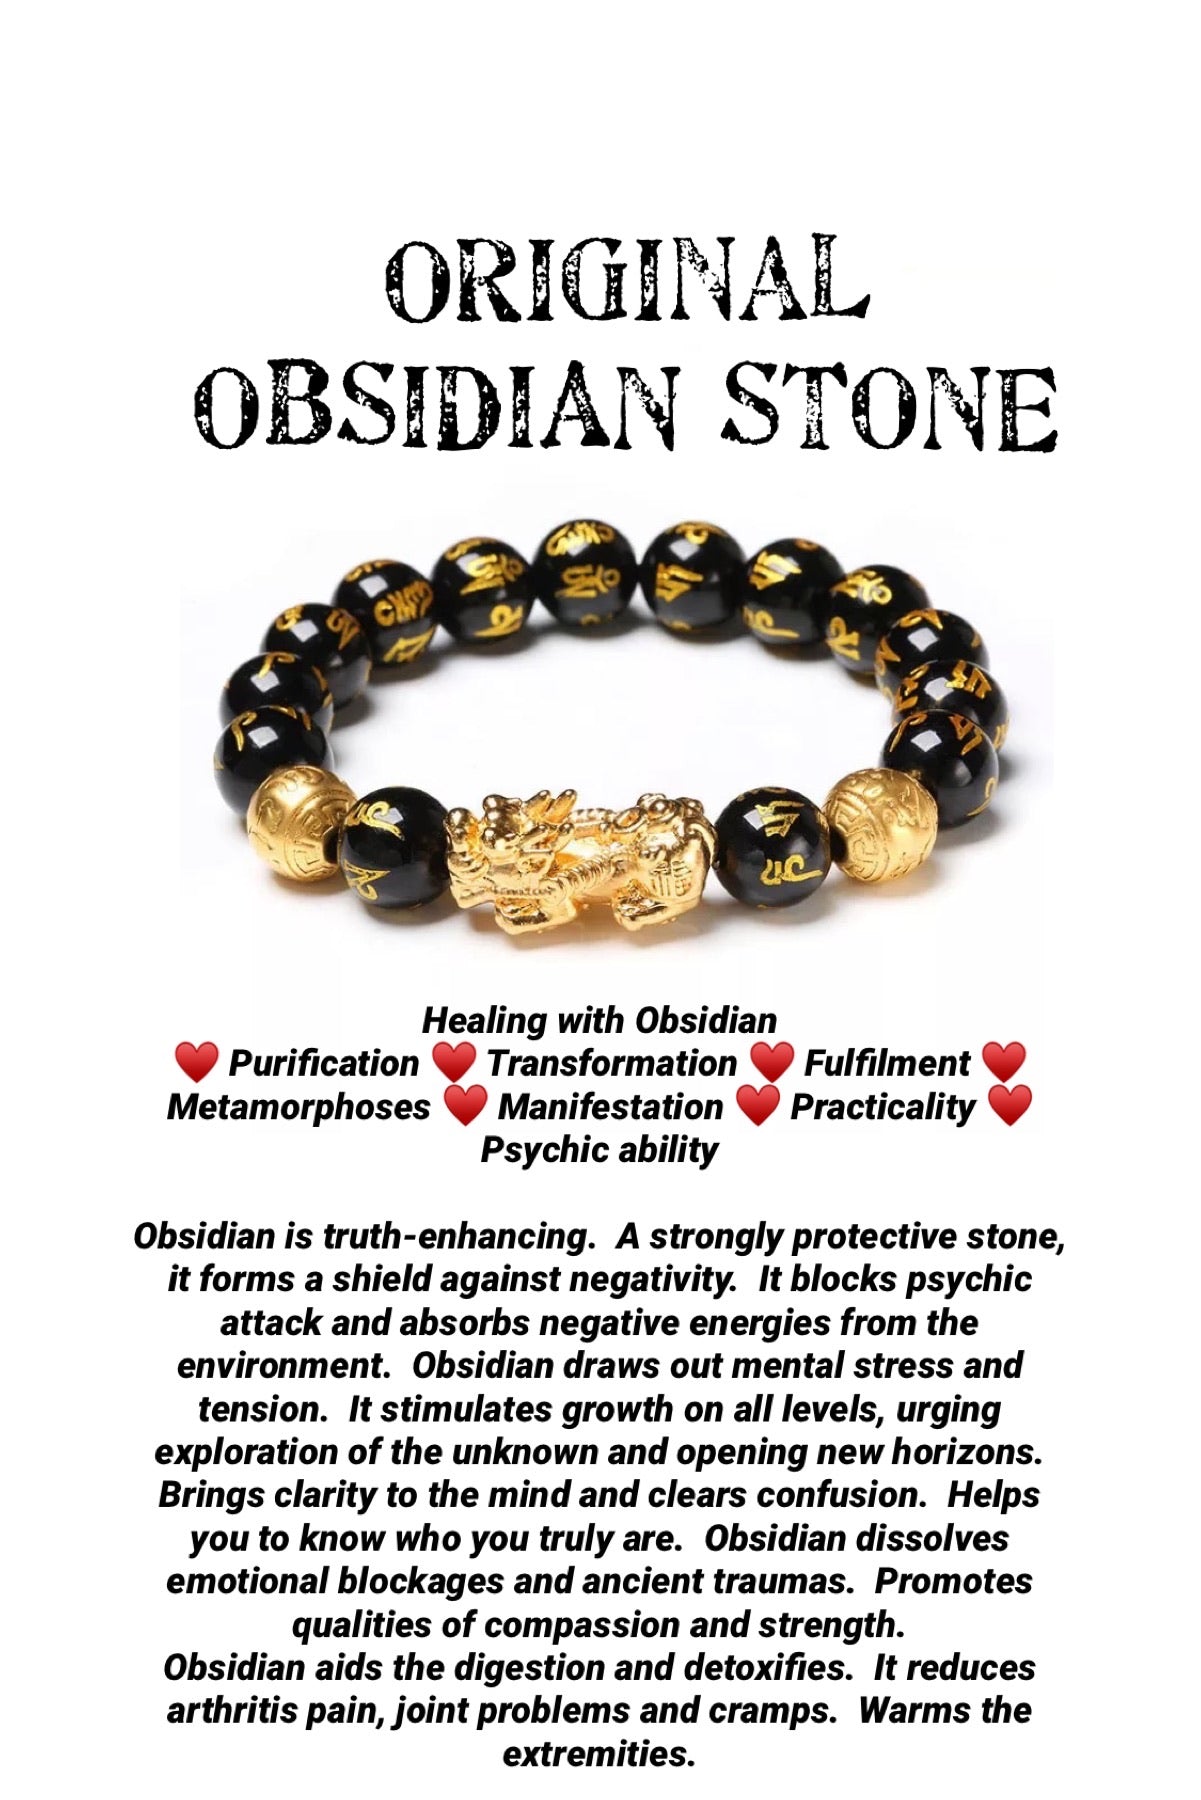 ORIGINAL OBSIDIAN STONE BRACELET ☪️ALL PRODUCTS COME CLEAN AND PREPARED WITH SPECIAL OILS AND PERFUMES☪️